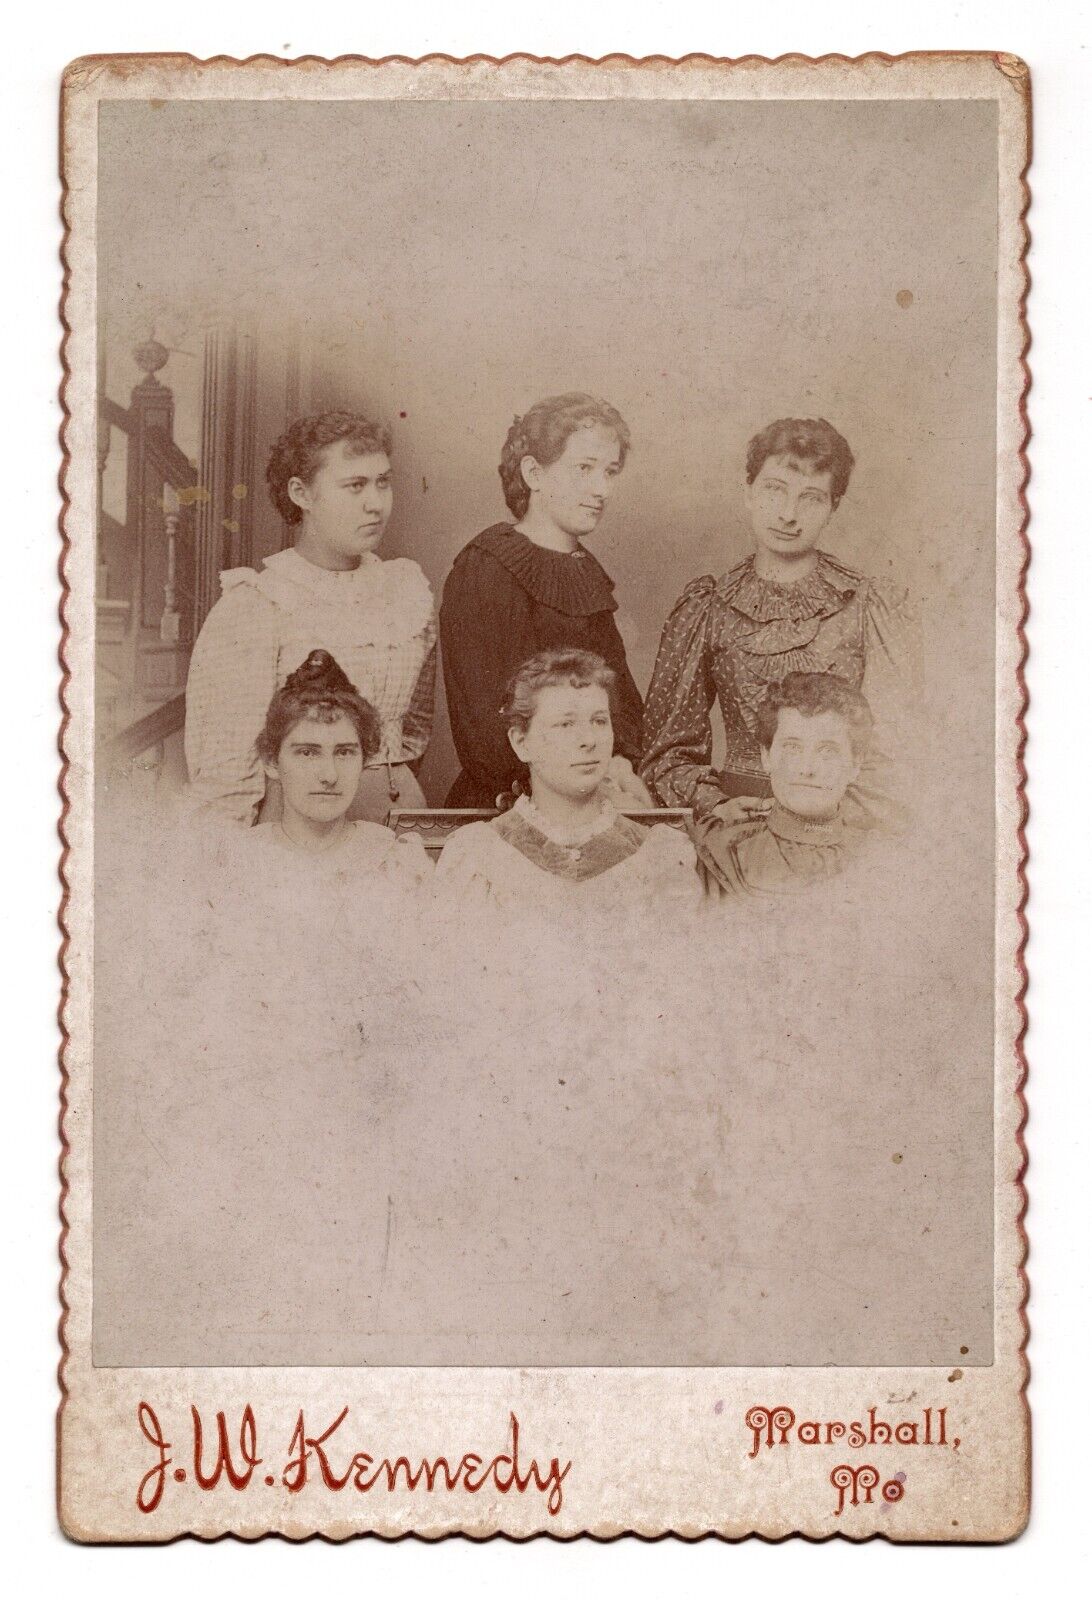 C. 1890s CABINET CARD J.W. KENNEDY SIX GORGEOUS YOUNG LADIES MARSHALL MISSOURI